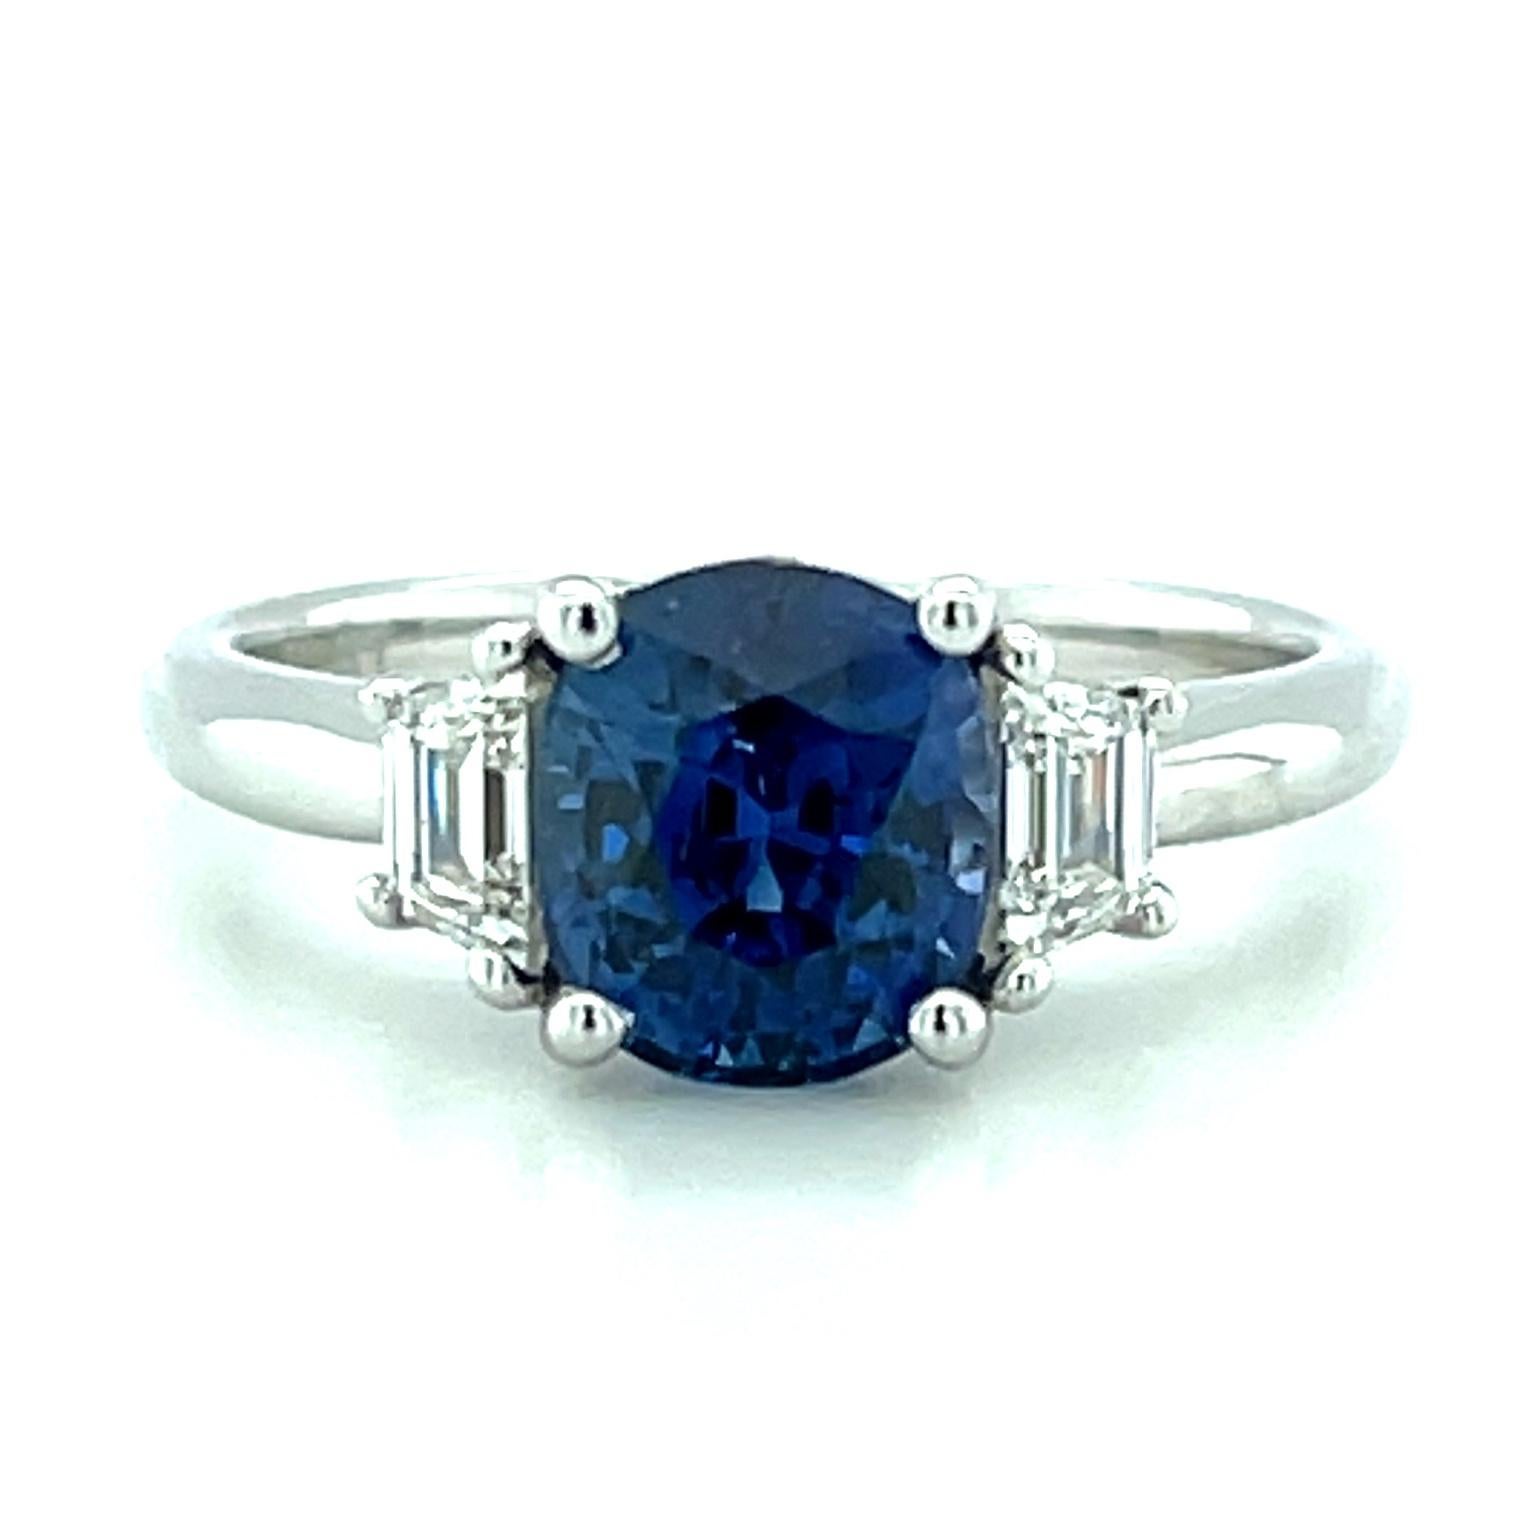 This beautiful 3-stone engagement ring features a sparkling, cushion-shaped Ceylon blue sapphire weighing 2.36 carats! The sapphire has gorgeous medium-blue color and corresponding GIA report #2225082226 certifying its Sri Lankan origin. Sri Lanka